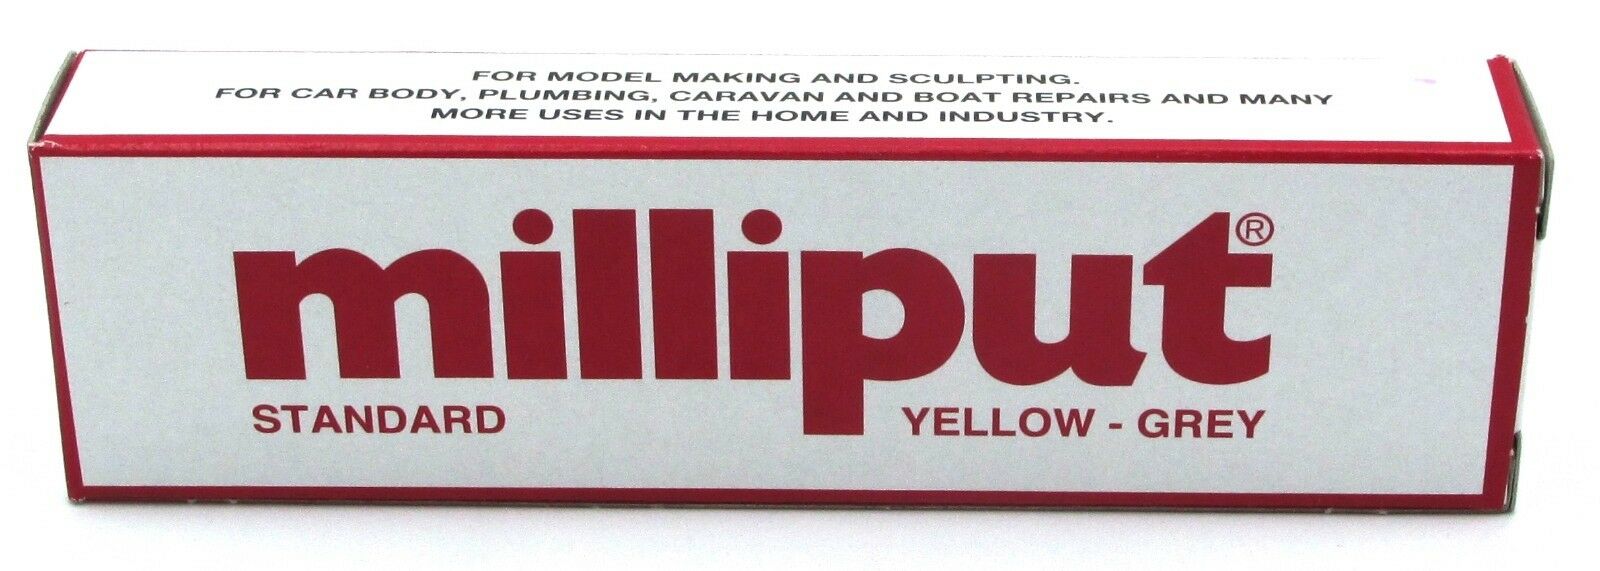 Milliput Standard Yellow-grey (4 Oz) Pack Two Part Epoxy Putty Modeling Supplies